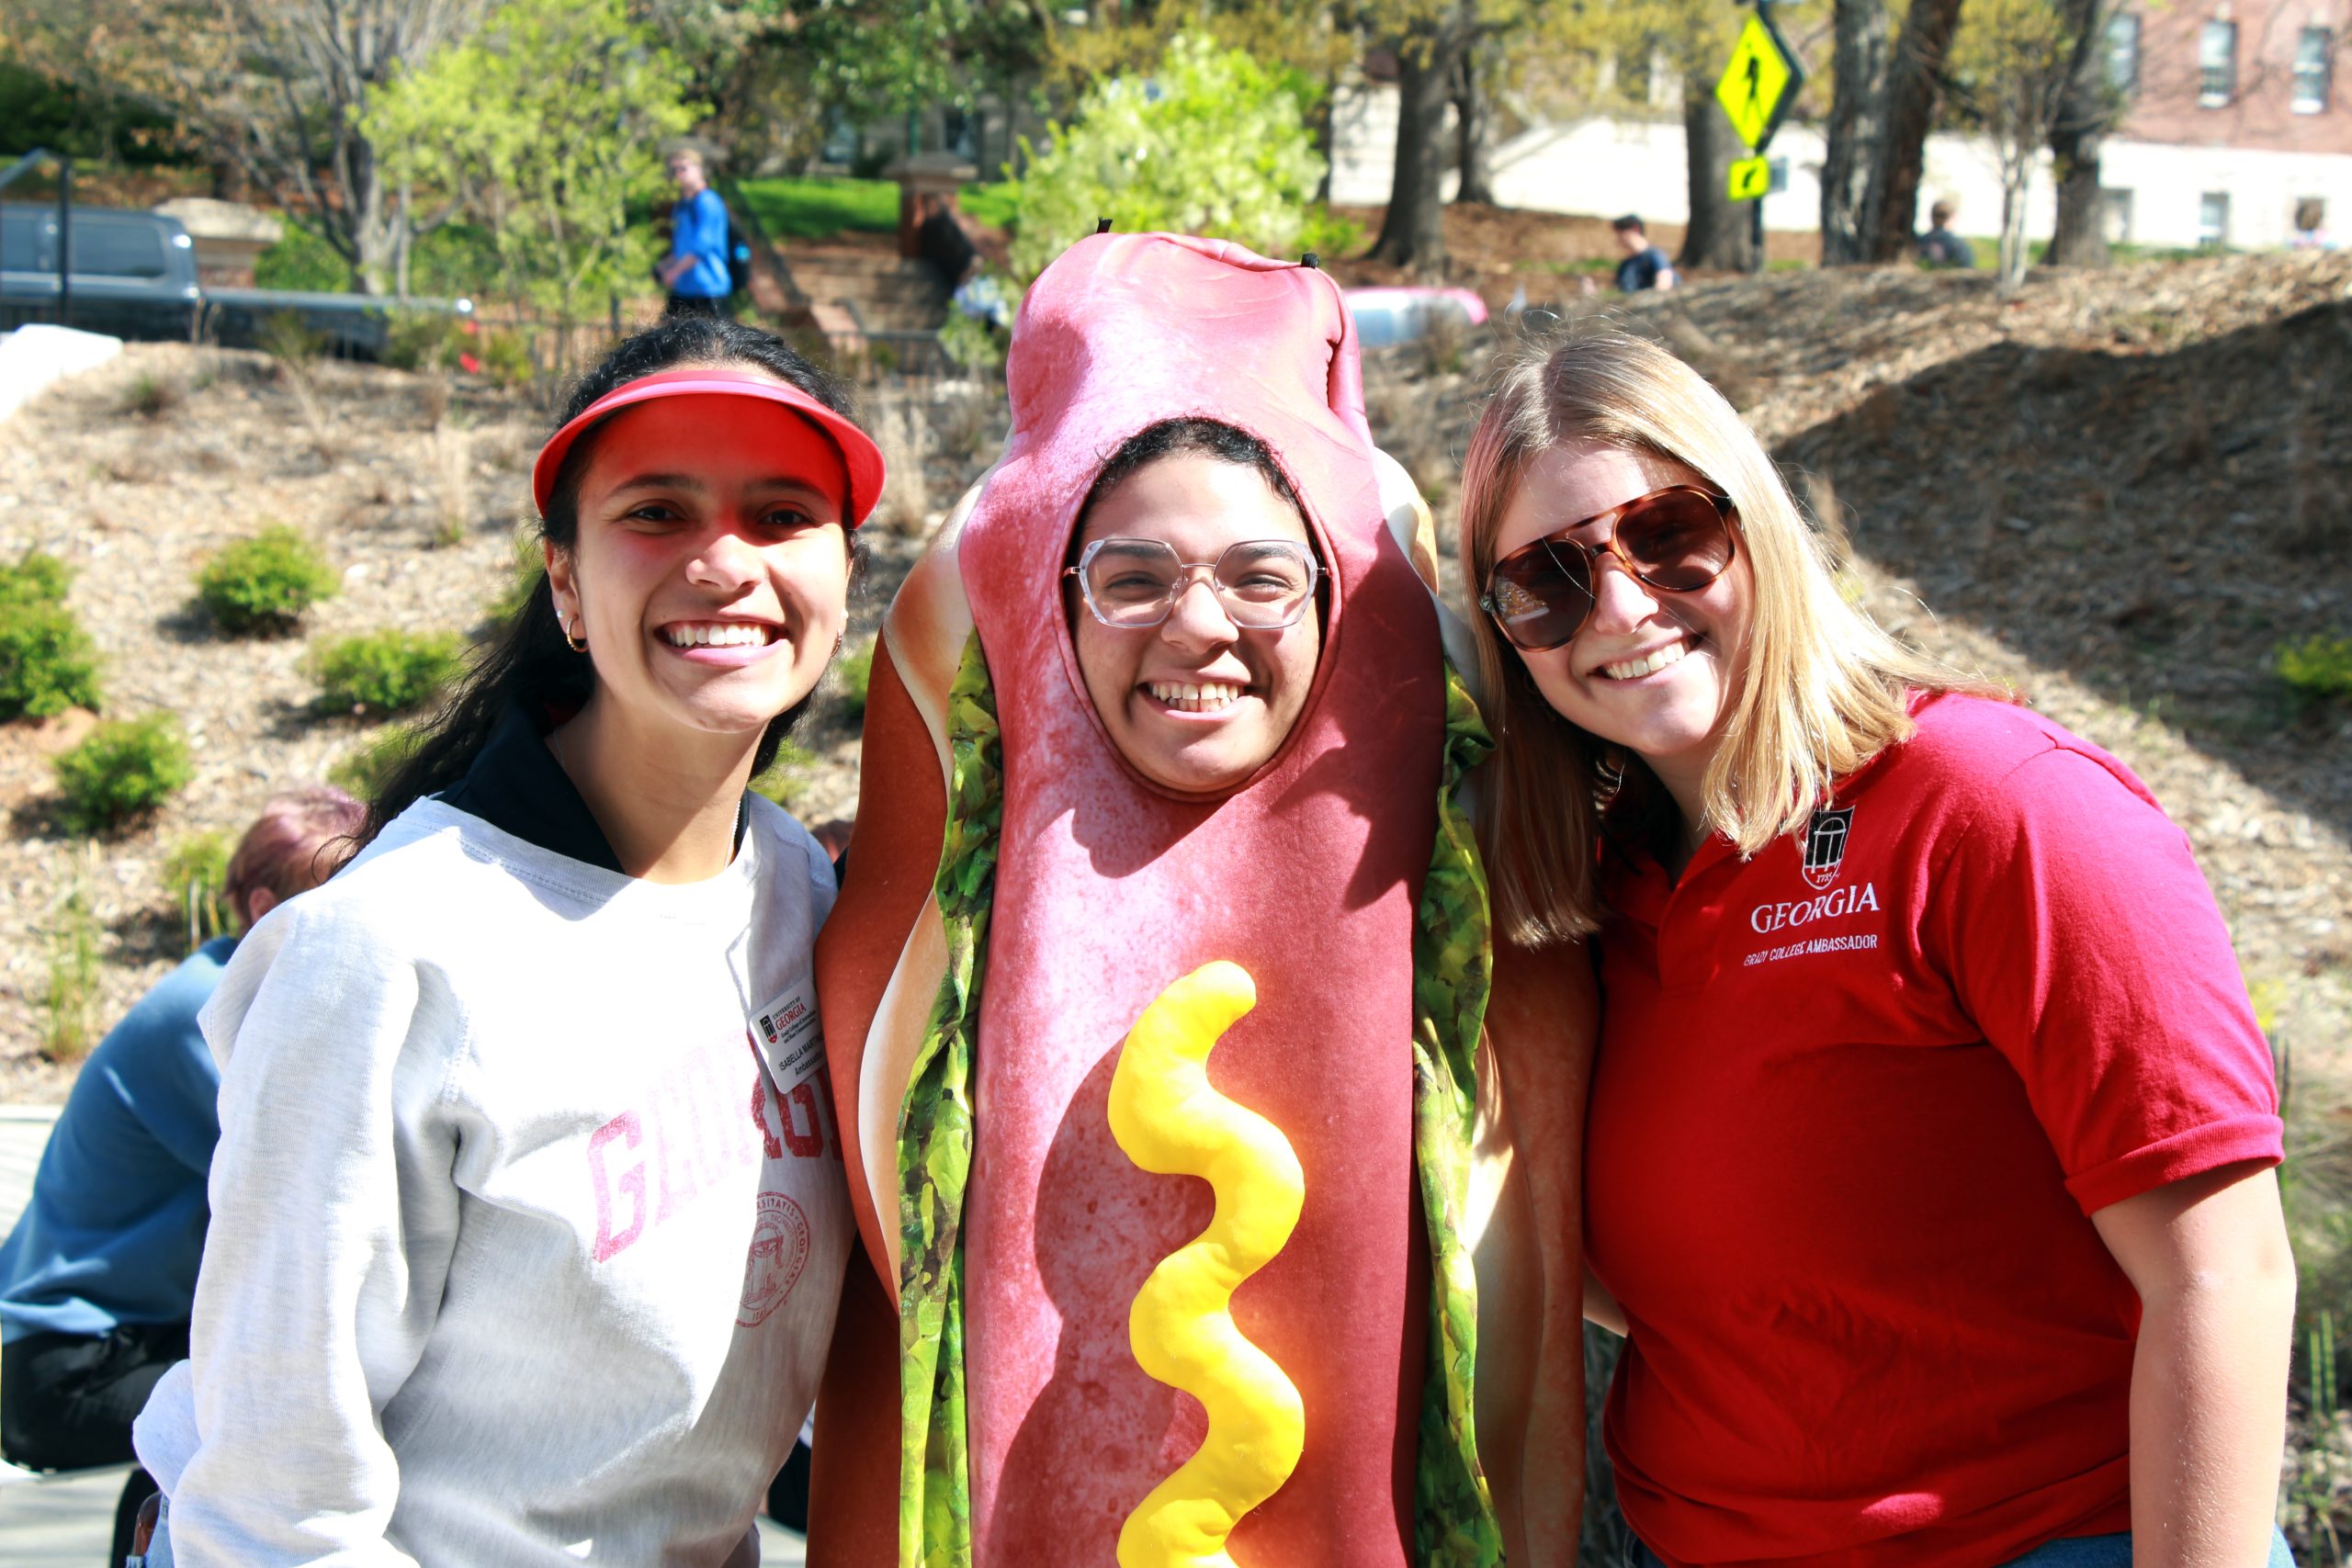 Three students, including one in the middle with a hot dog costume on, pose for a photo outside during Dawgs with the Dean.